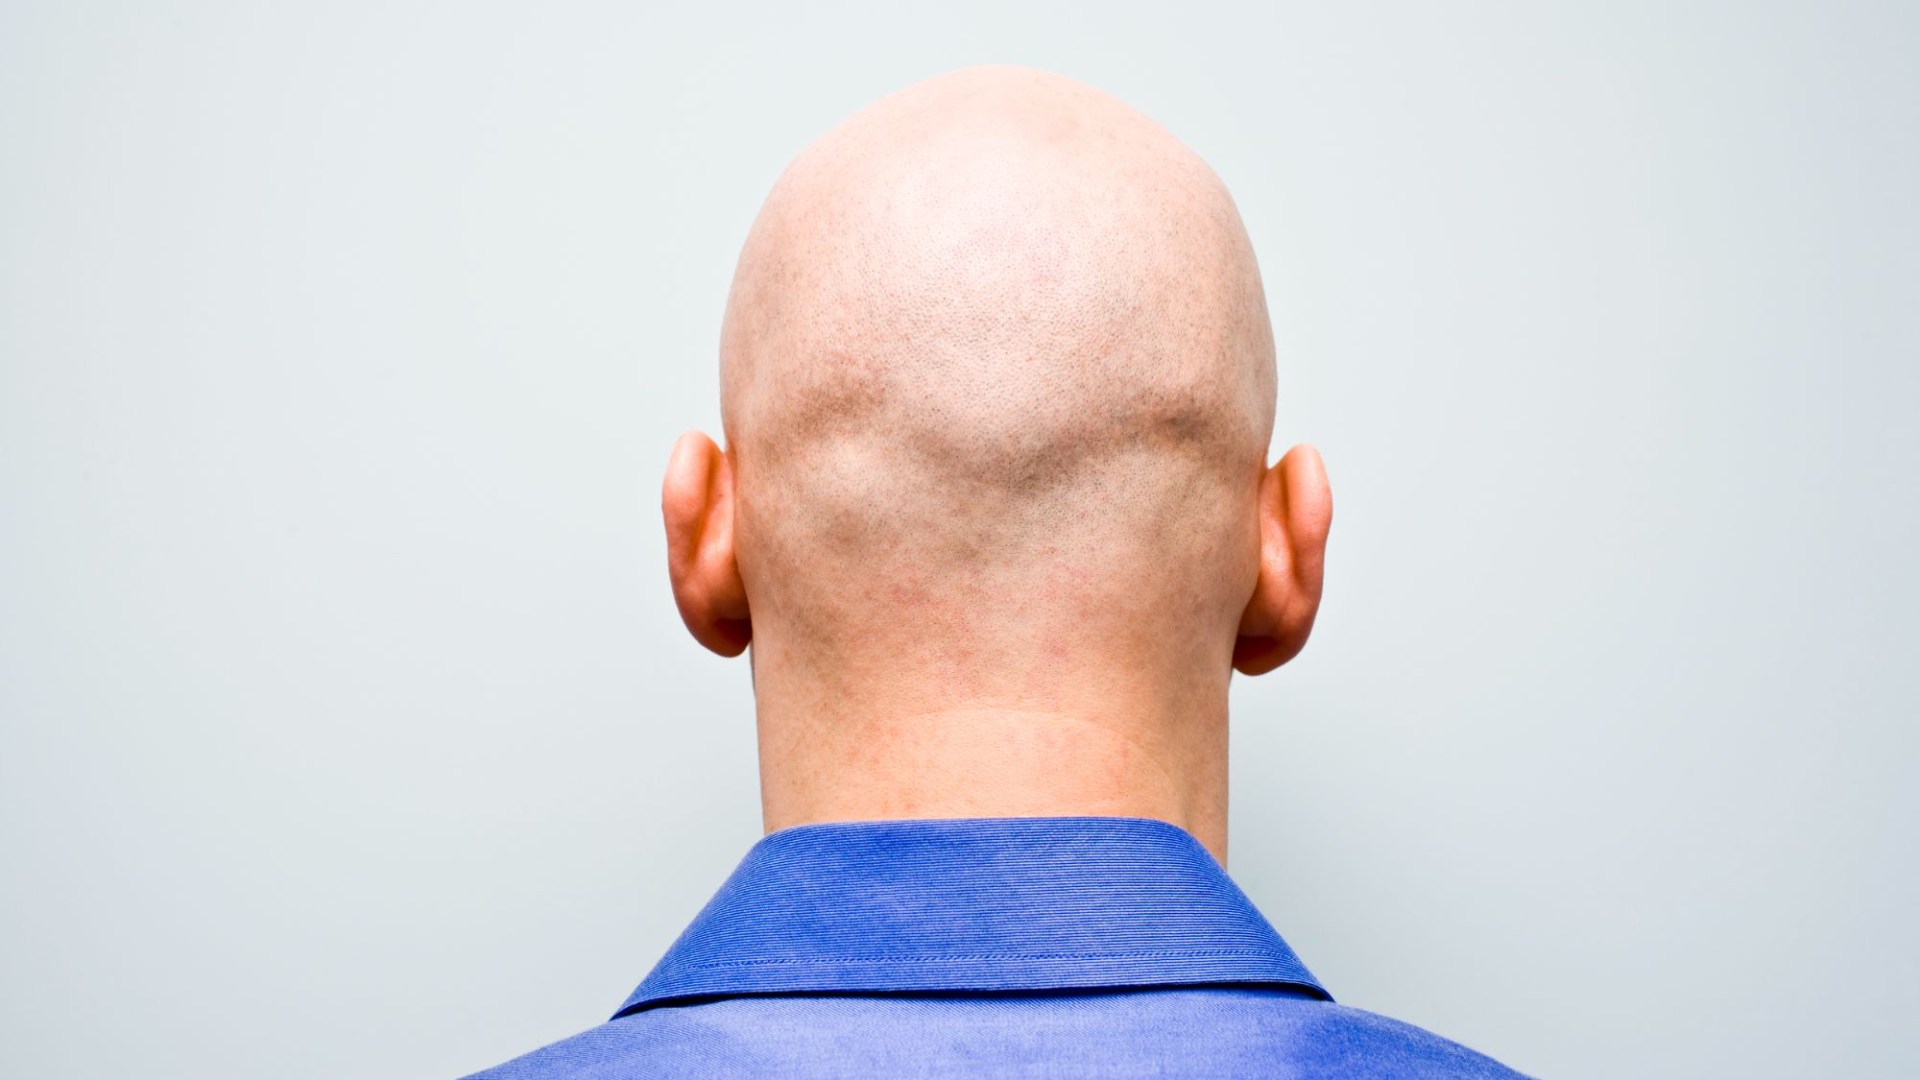 Baldness could be cured by a sugar that naturally occurs in the body, experts say [Video]